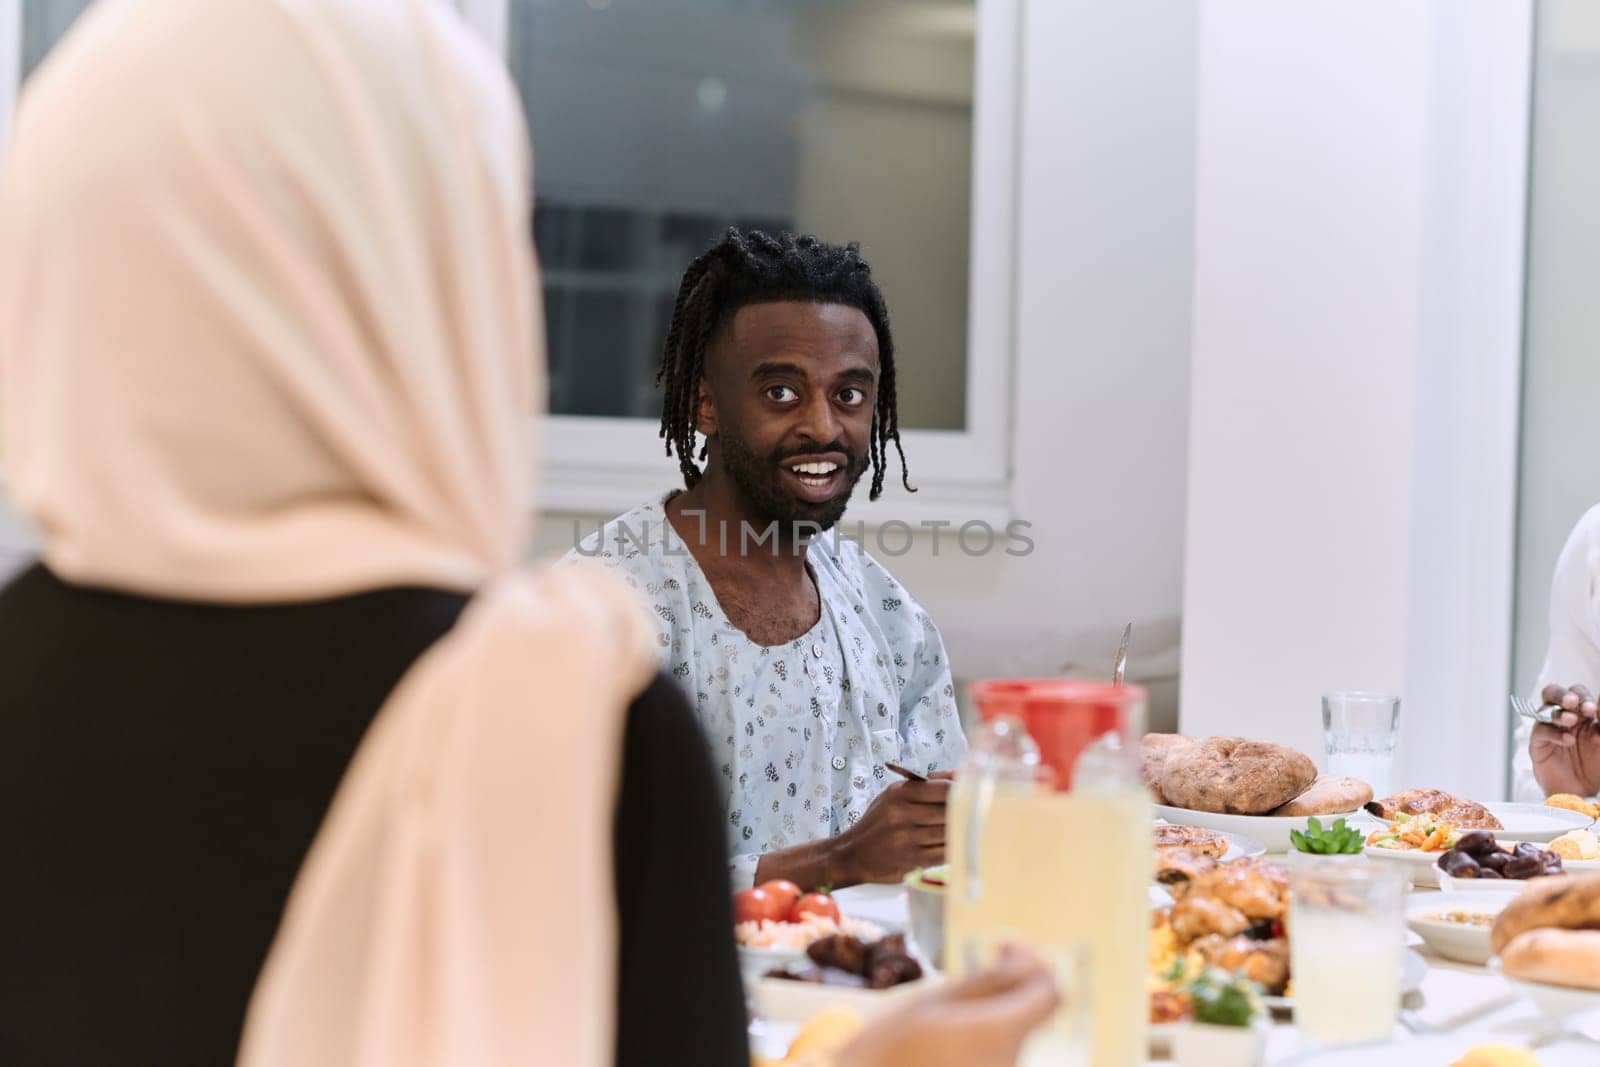 A traditional and diverse Muslim family comes together to share a delicious iftar meal during the sacred month of Ramadan, embodying the essence of familial joy, cultural richness, and spiritual unity in their shared celebration.